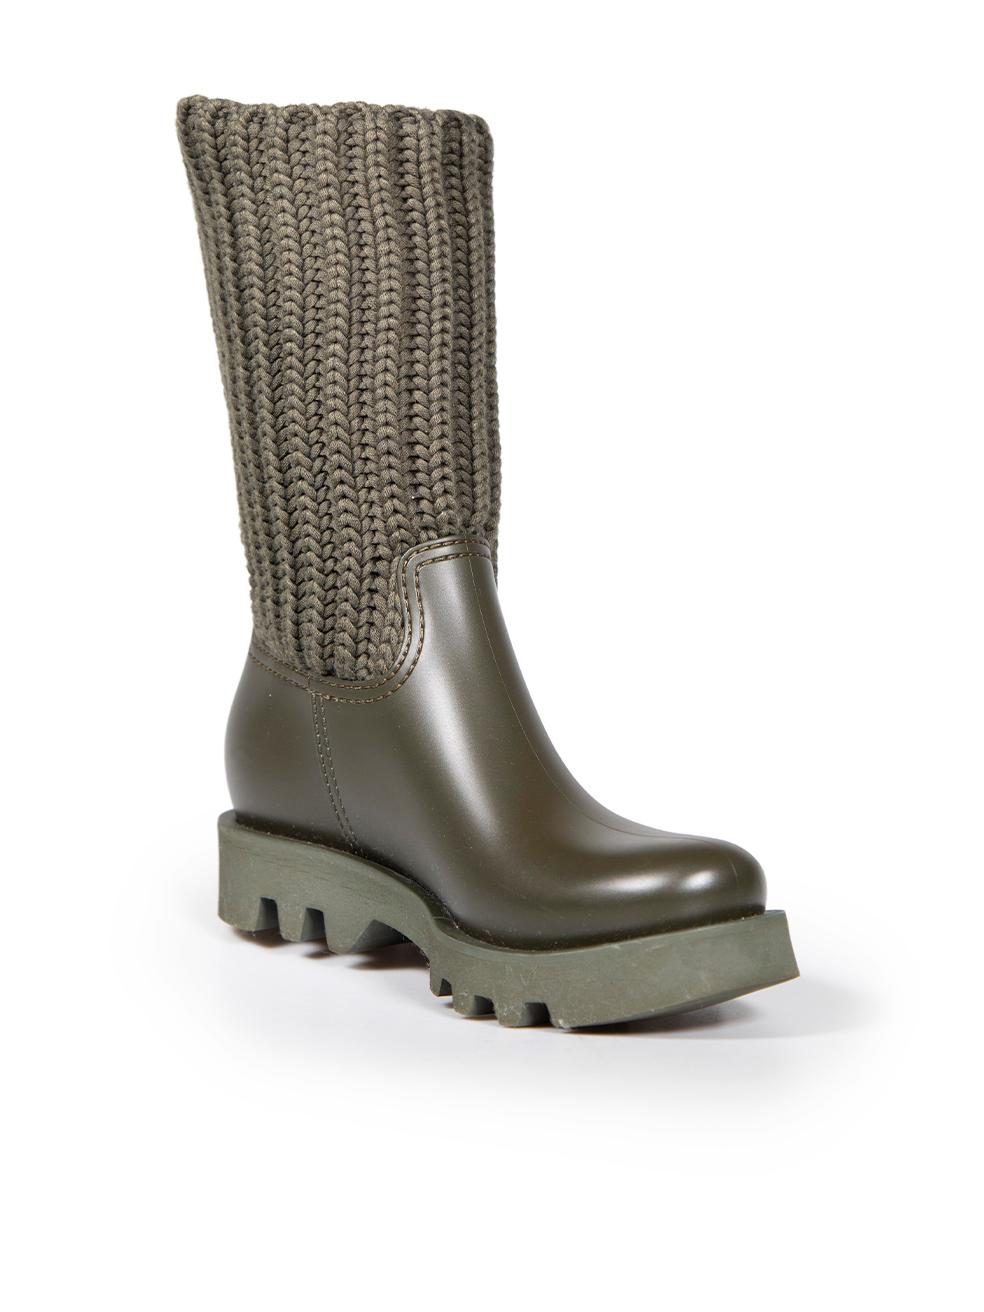 CONDITION is Very good. Hardly any visible wear to boots is evident on this used Moncler designer resale item. This item comes with original dust bag.
 
 
 
 Details
 
 
 Green
 
 Rubber
 
 Rain boots
 
 Knitted ankle
 
 Round toe
 
 Flatform sole
